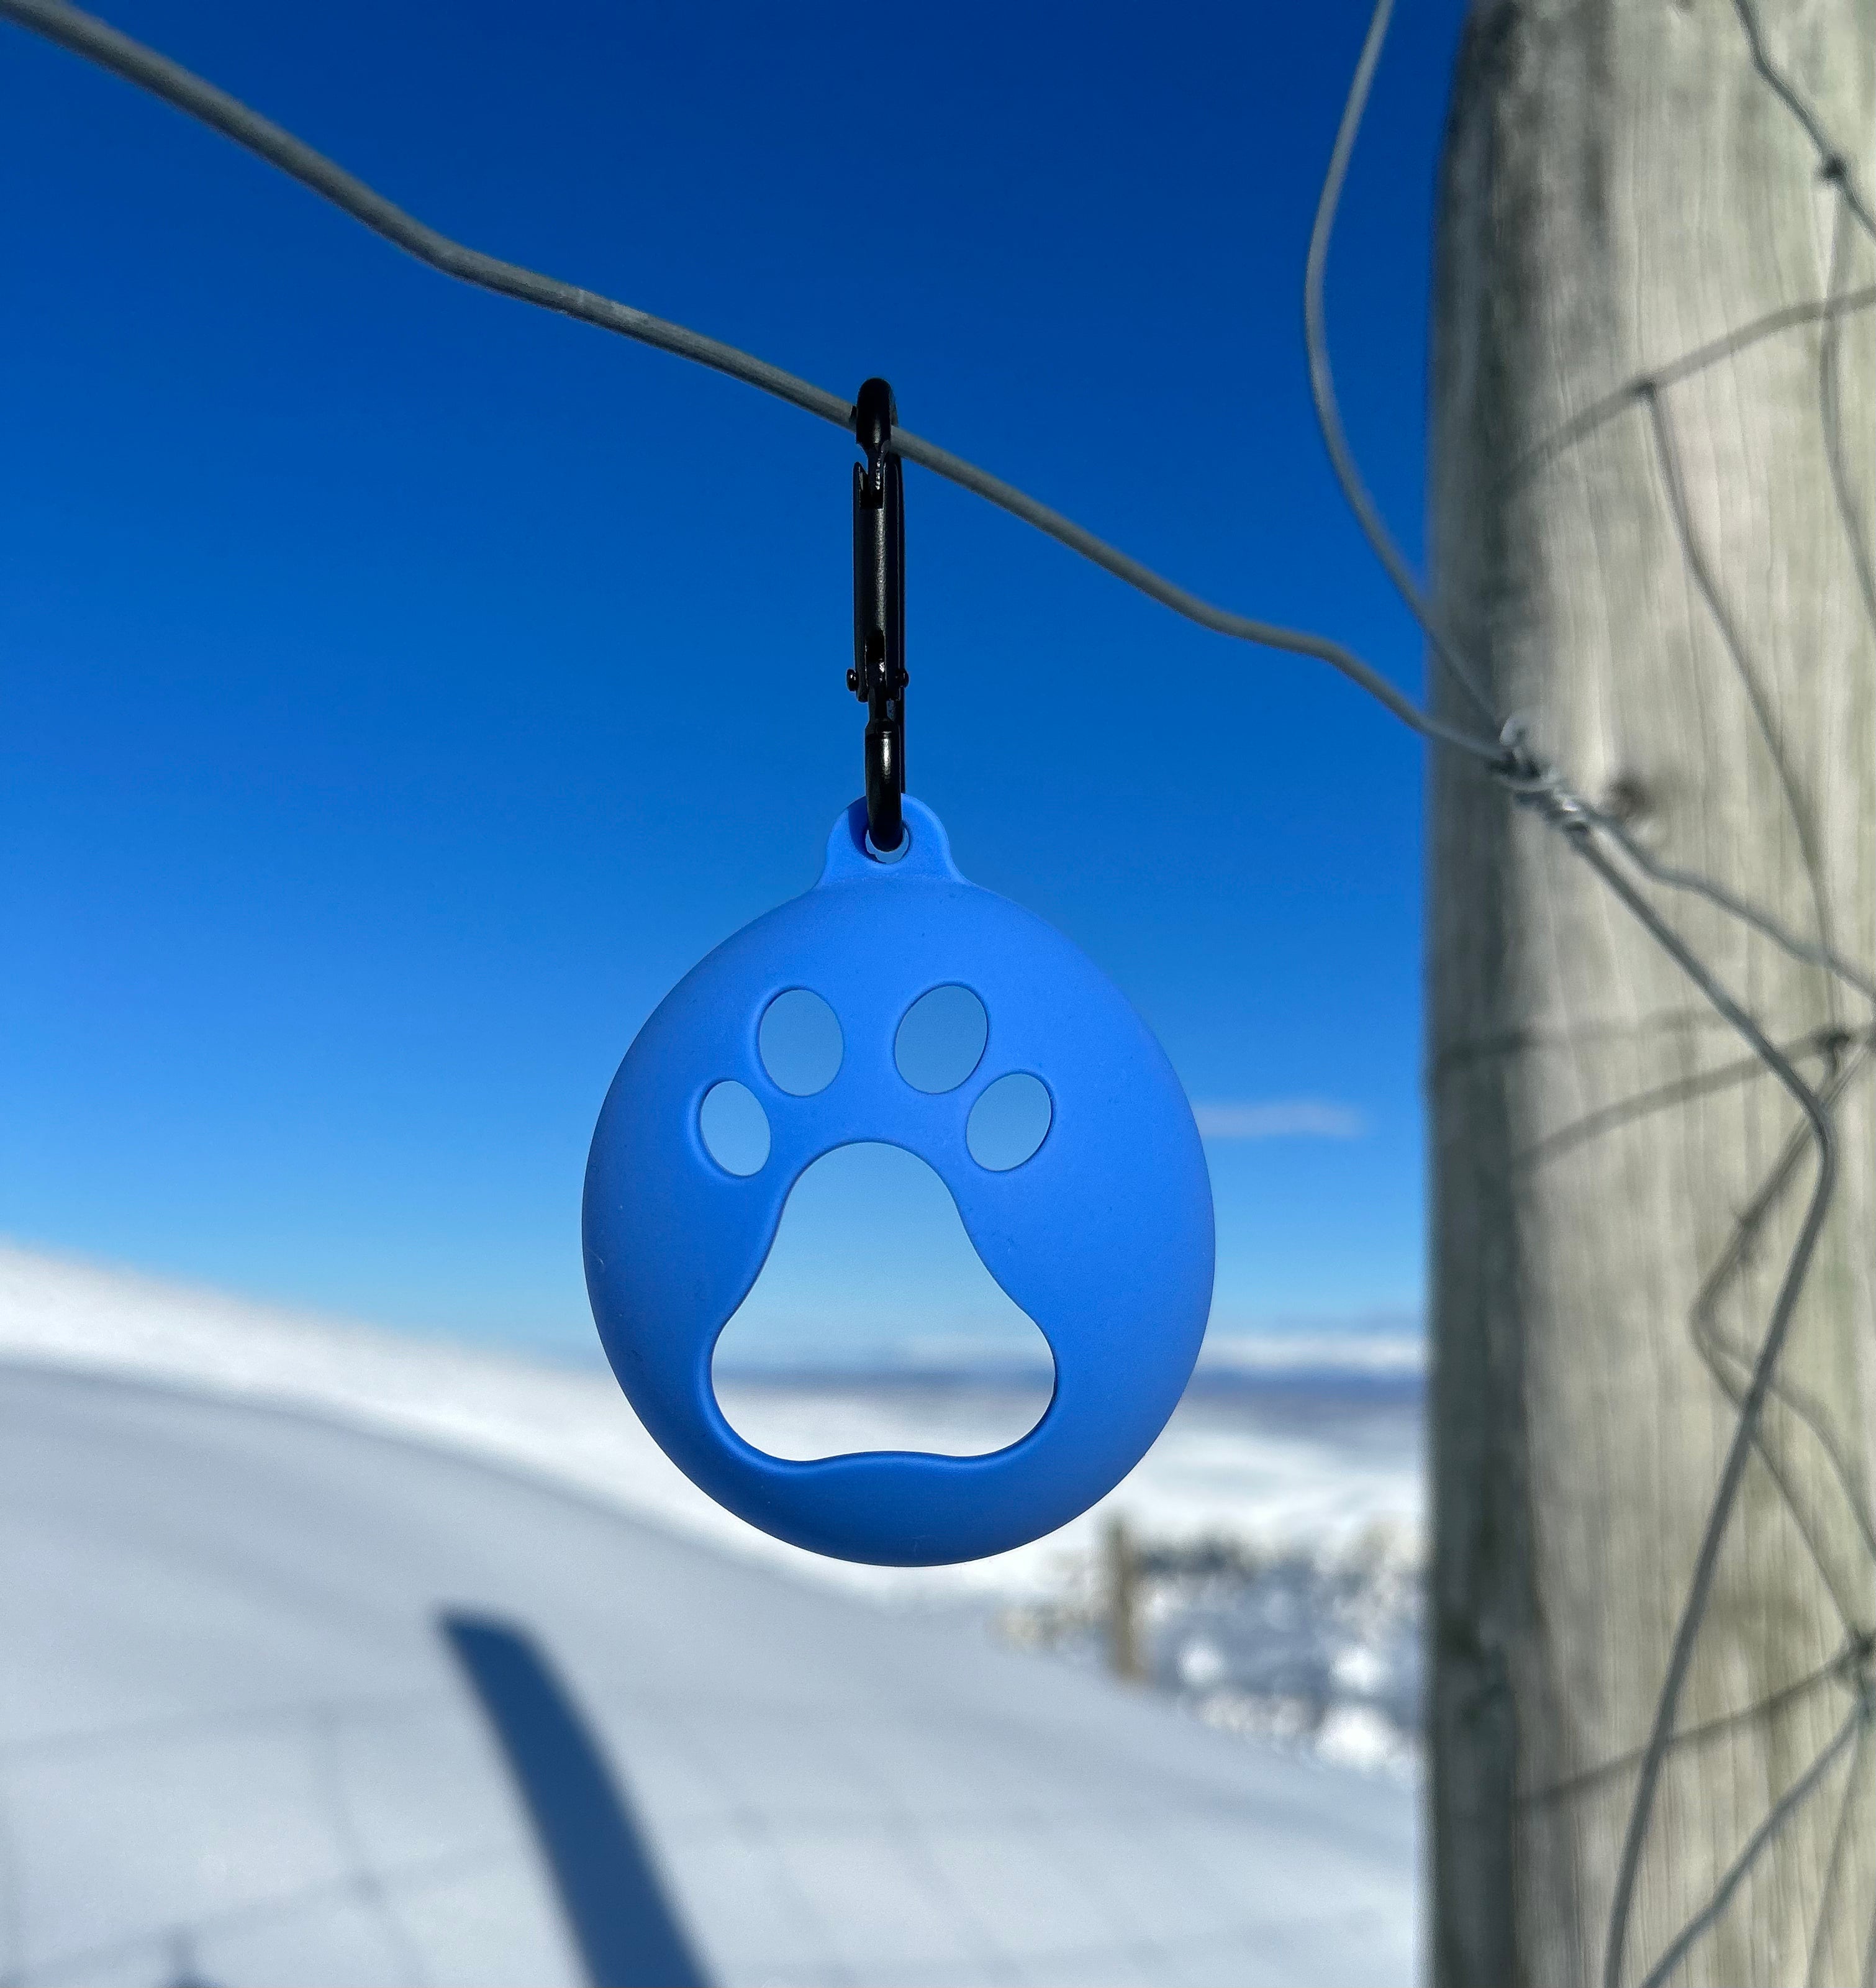 Pet Products Ball Holder